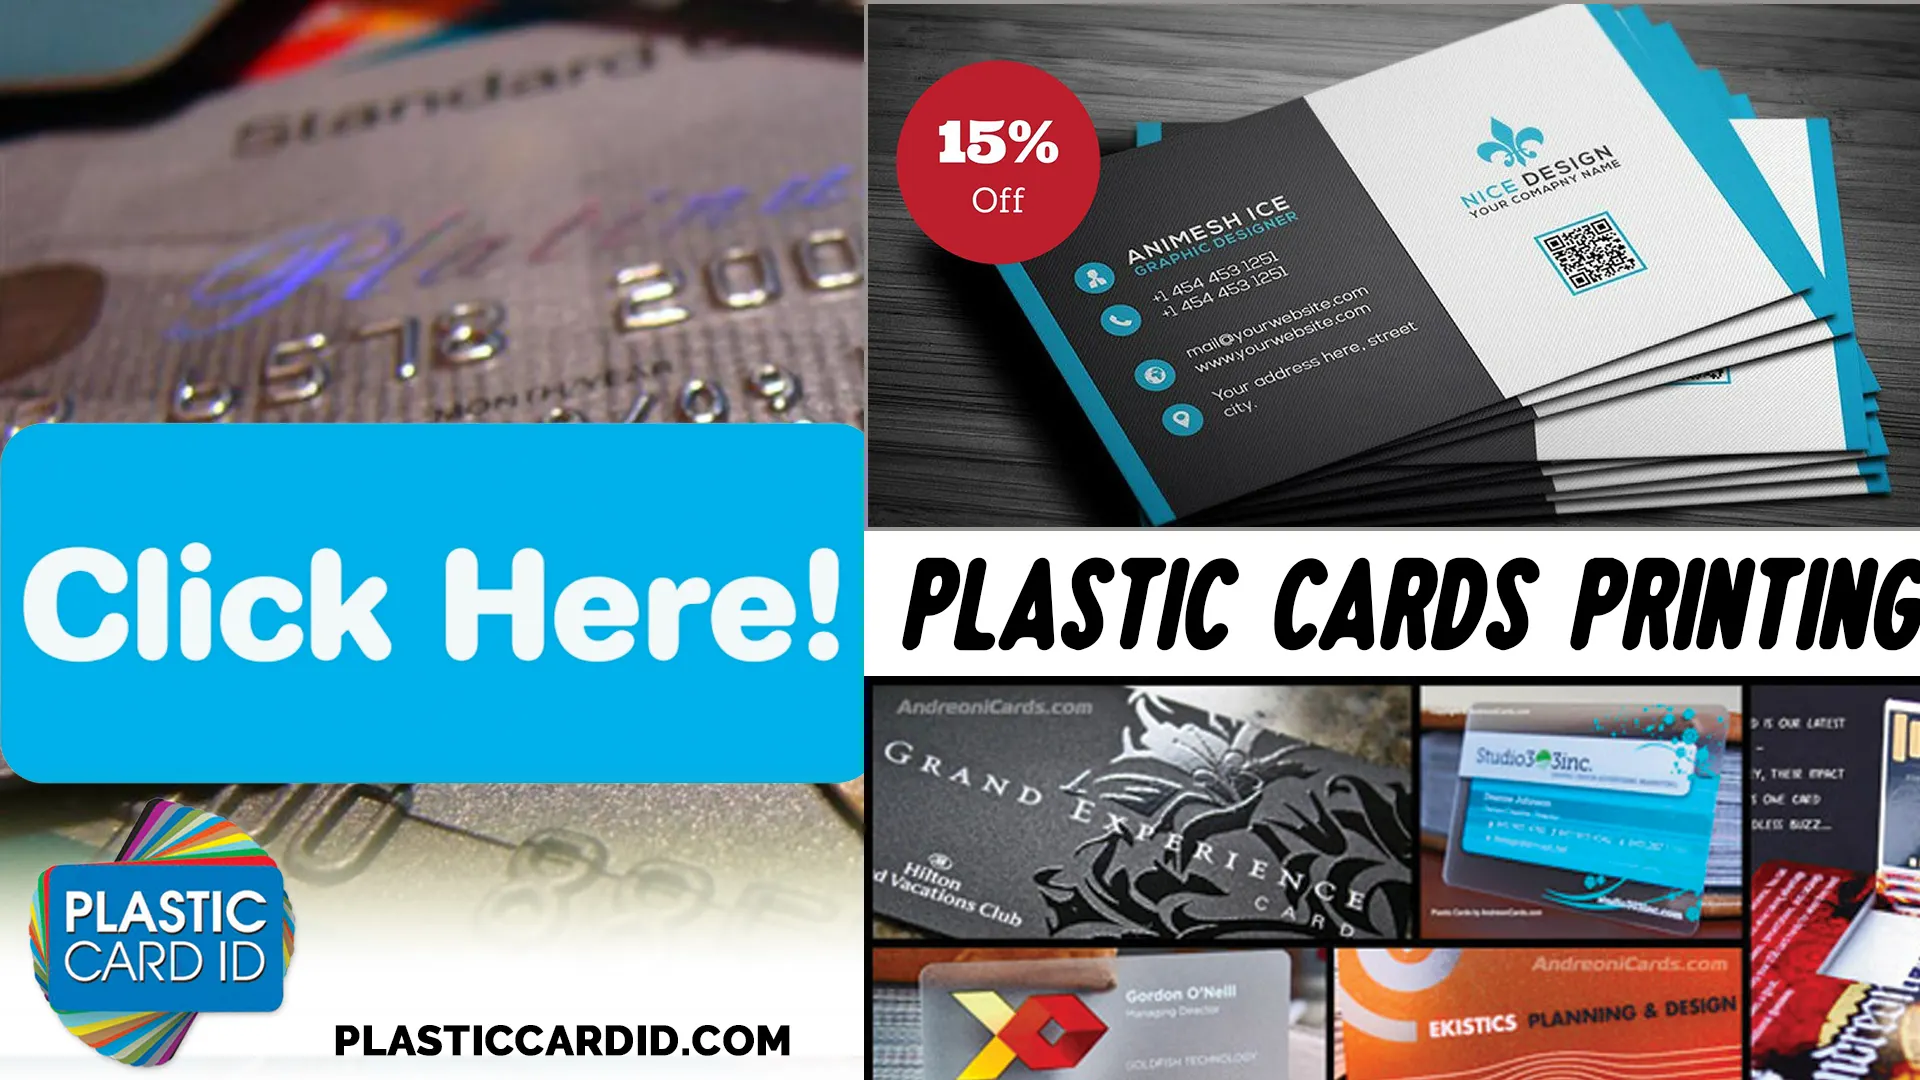 Trust Plastic Card ID




 to Deliver Top Quality Plastic Cards